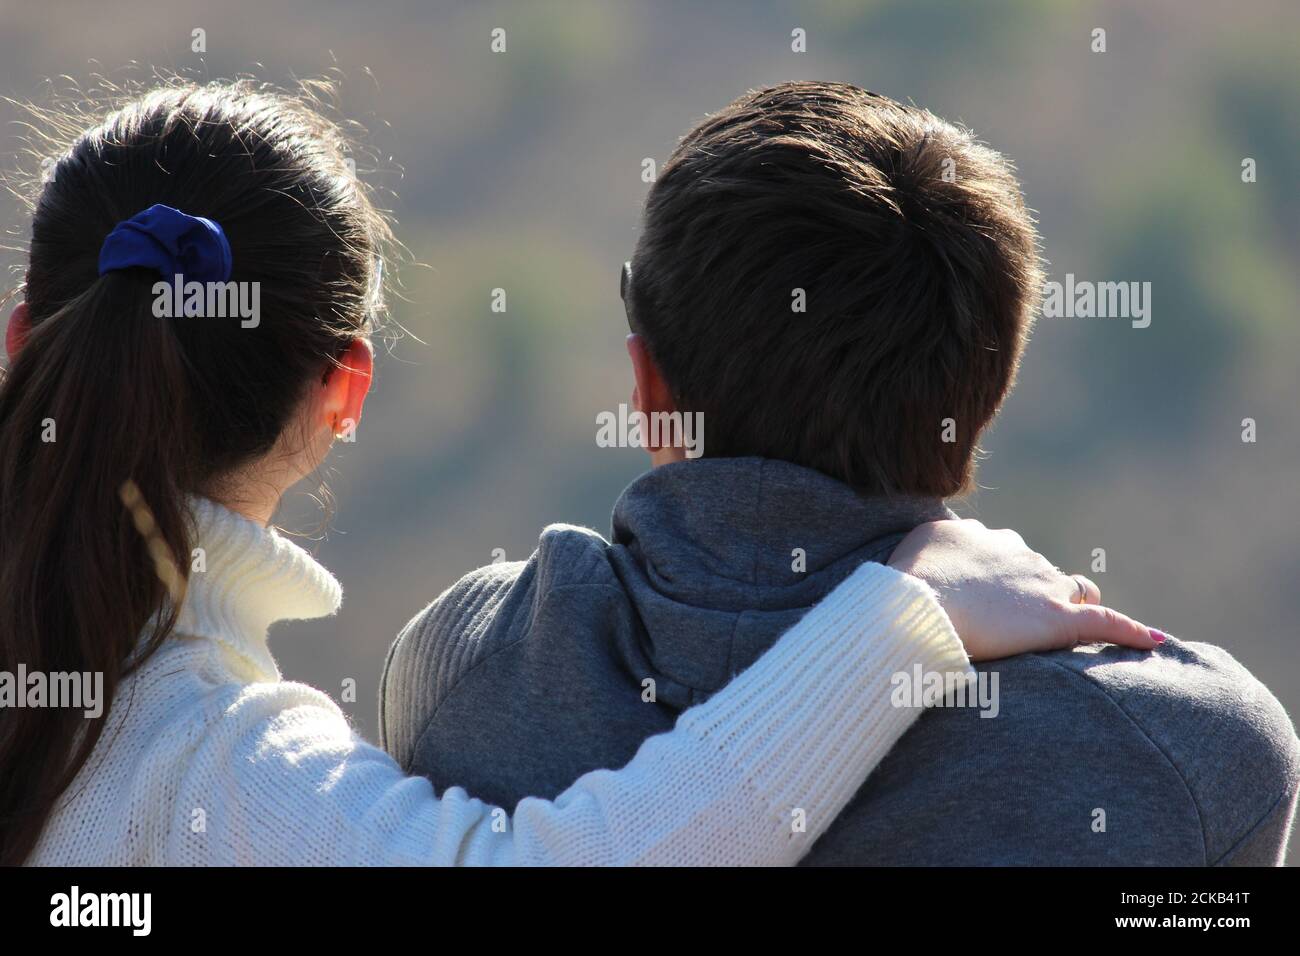 Girl and guy kind of from the back. Stock Photo